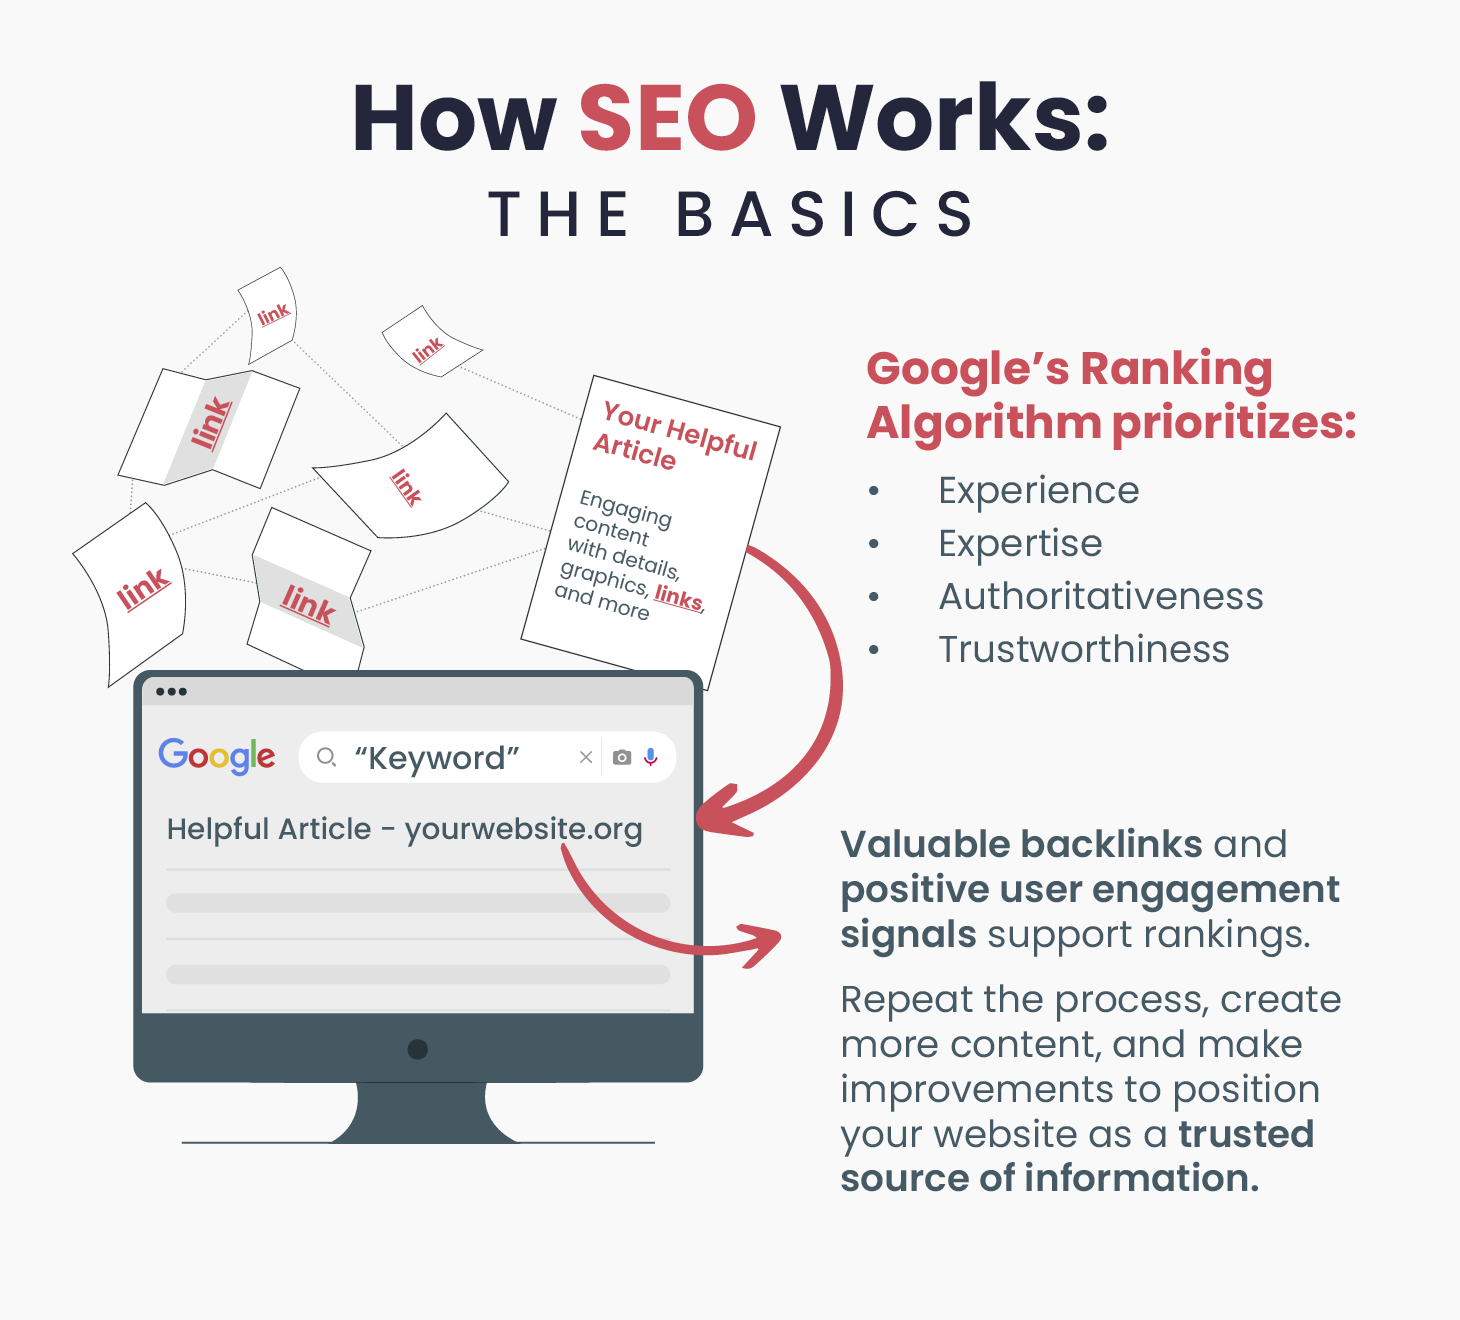 A diagram of the very condensed SEO ranking process